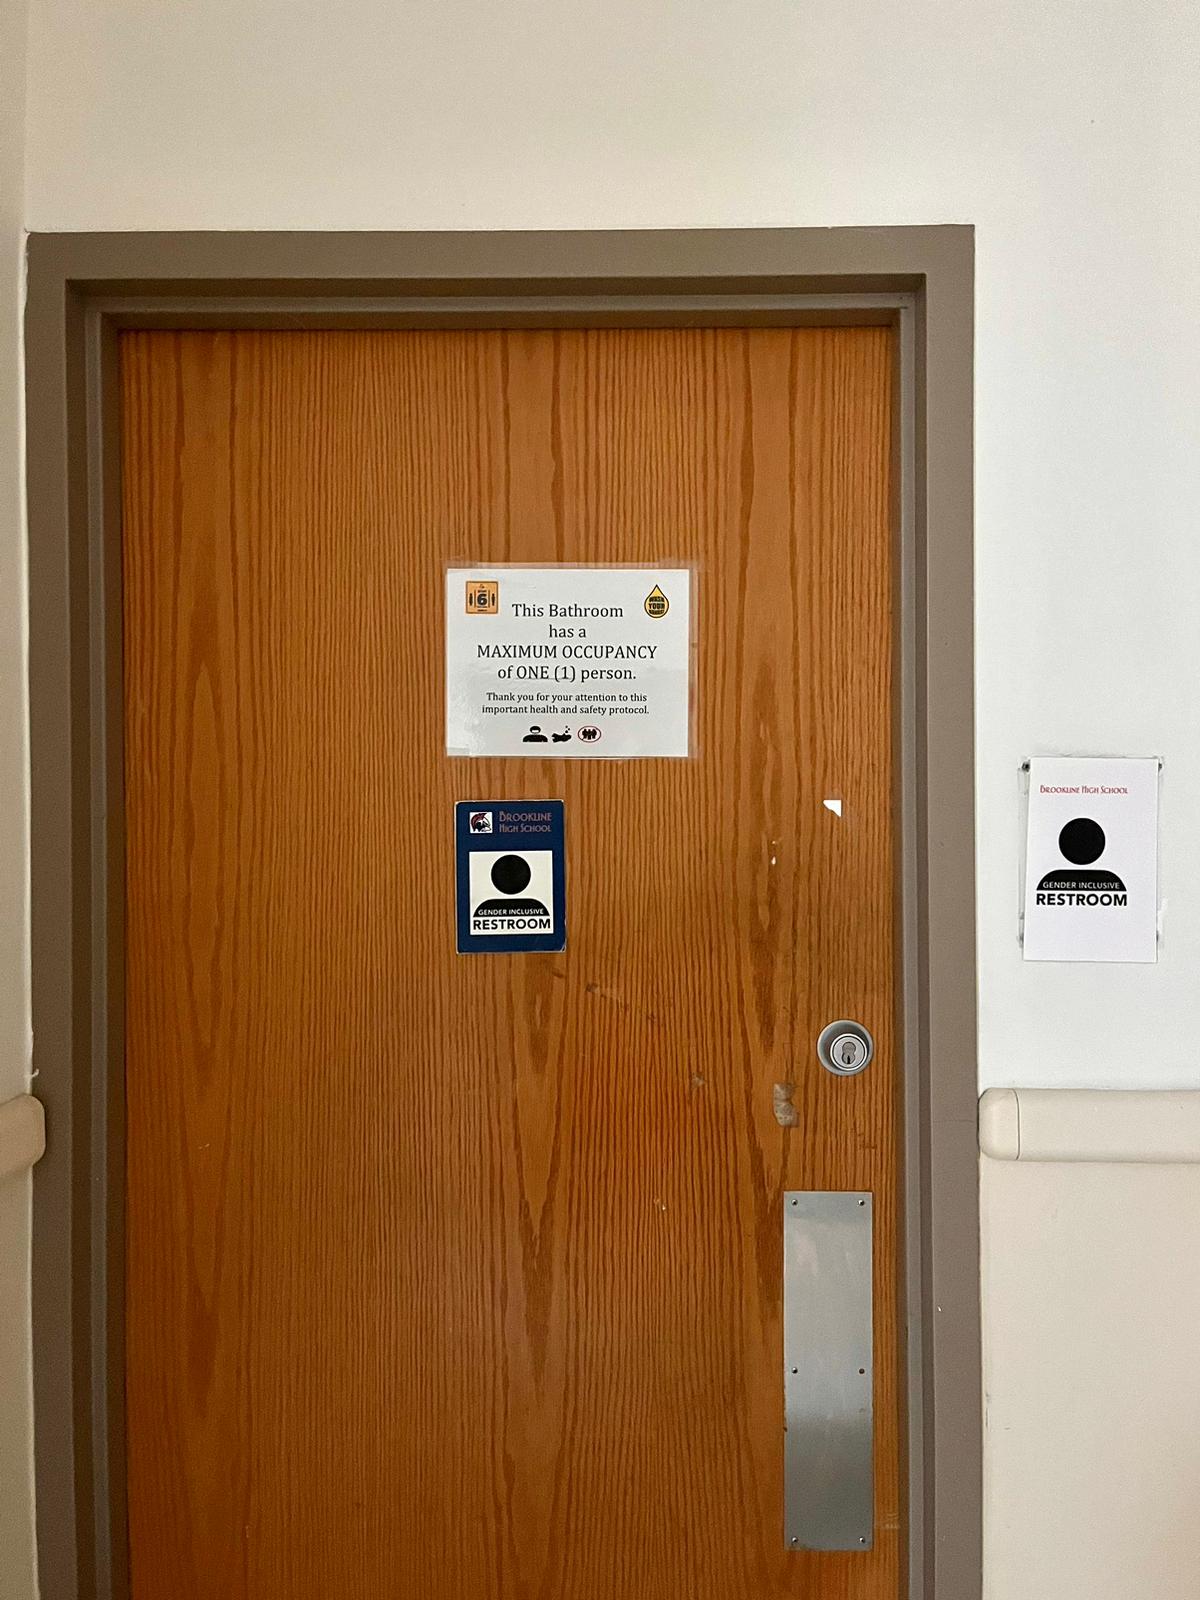 The schools largest gender-neutral bathrooms has only two stalls. The smallest gendered bathrooms have three stalls. The limited availability of gender-neutral stalls can pose barriers to gender-queer students using the bathroom at school.